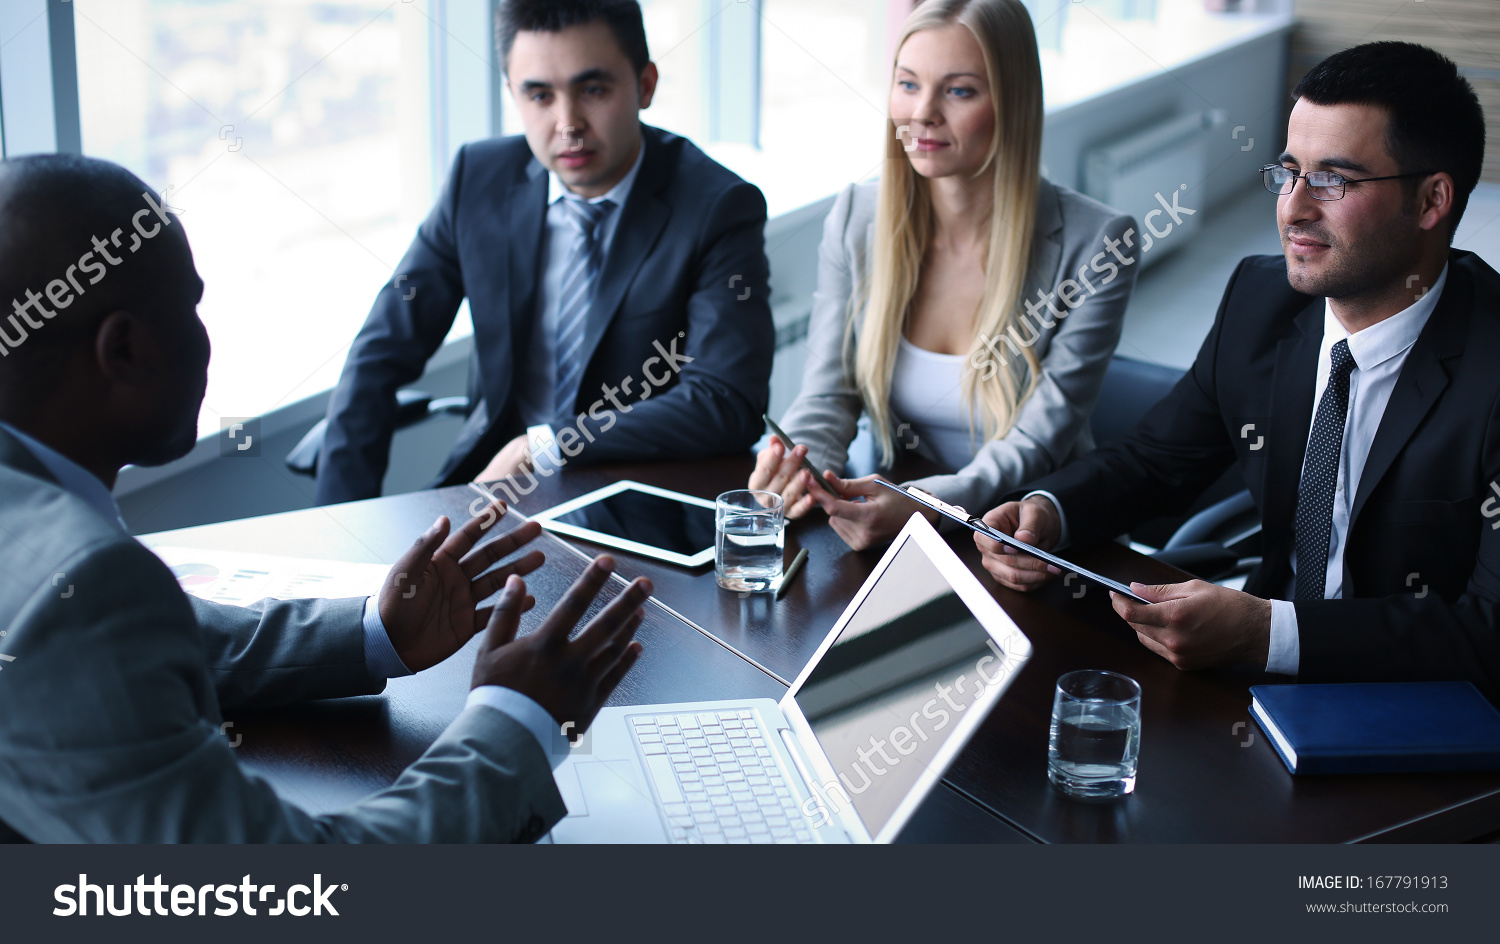 stock-photo-image-of-business-people-interacting-at-meeting-167791913 ...